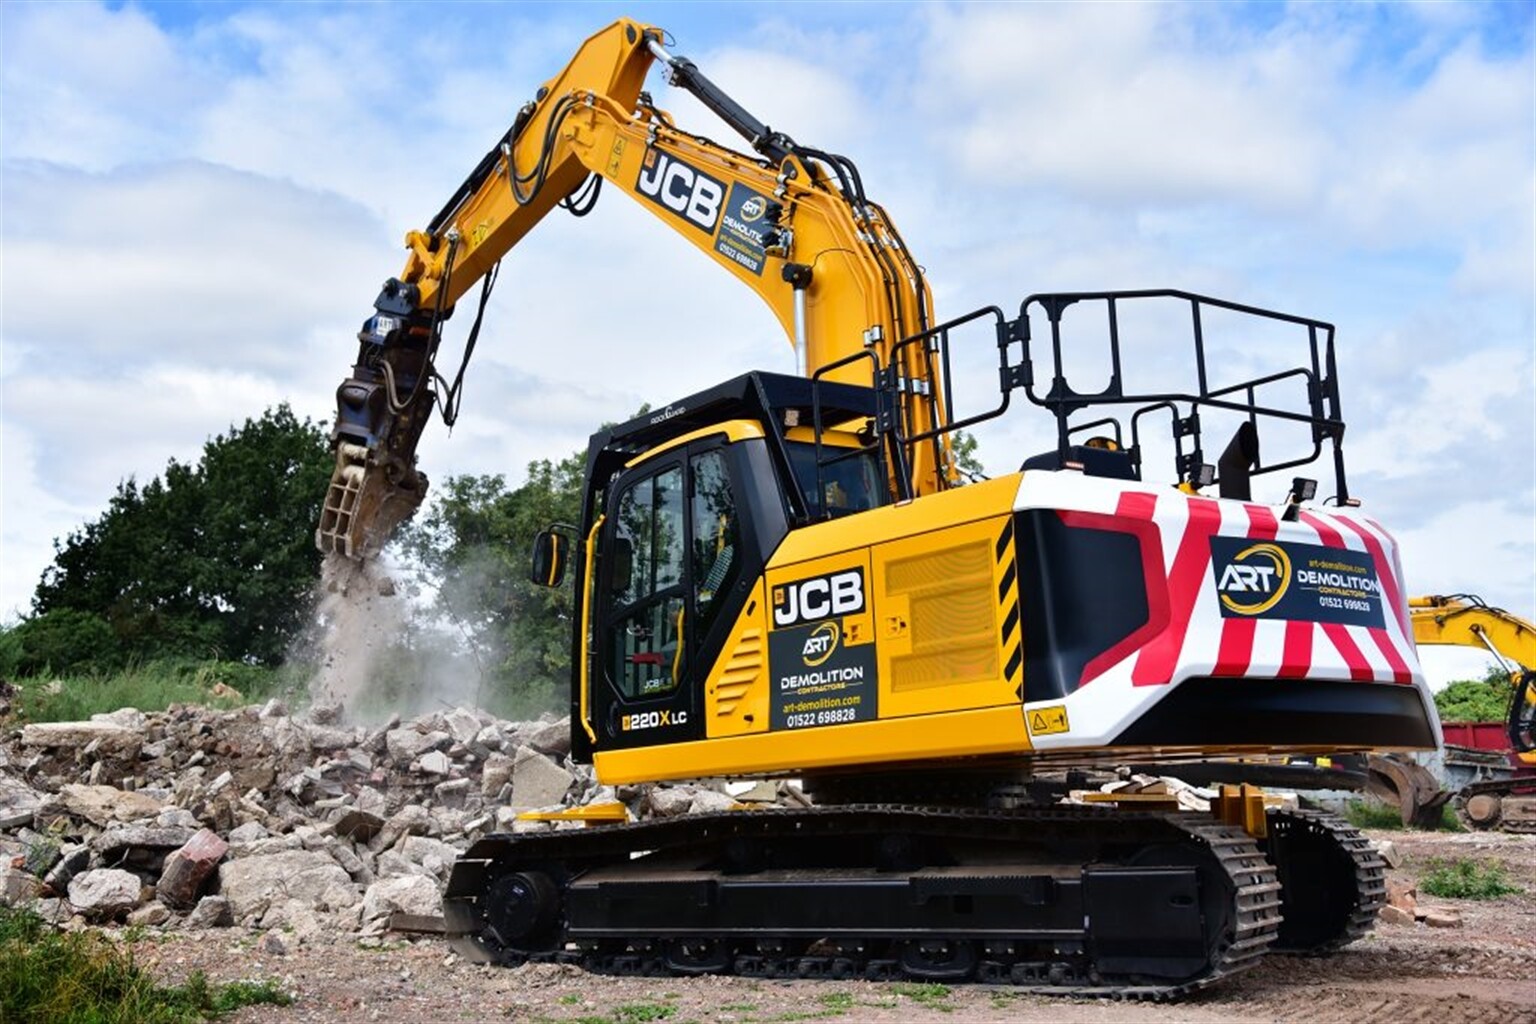 New JCB X Series is a masterpiece for A.R.T. Demolition